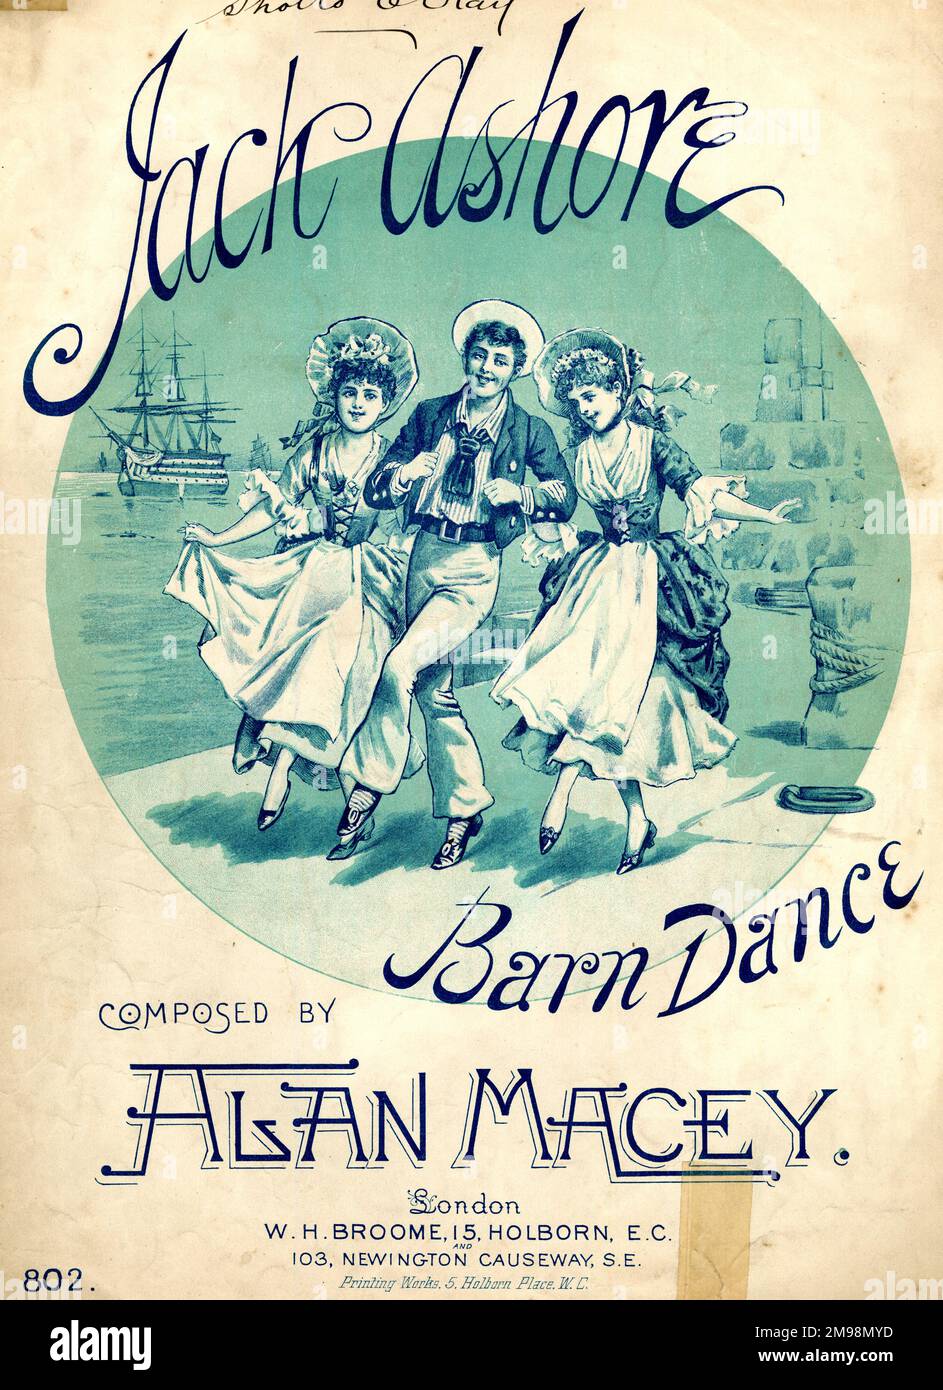 Music cover, Jack Ashore Barn Dance, composed by Alan Macey. Stock Photo